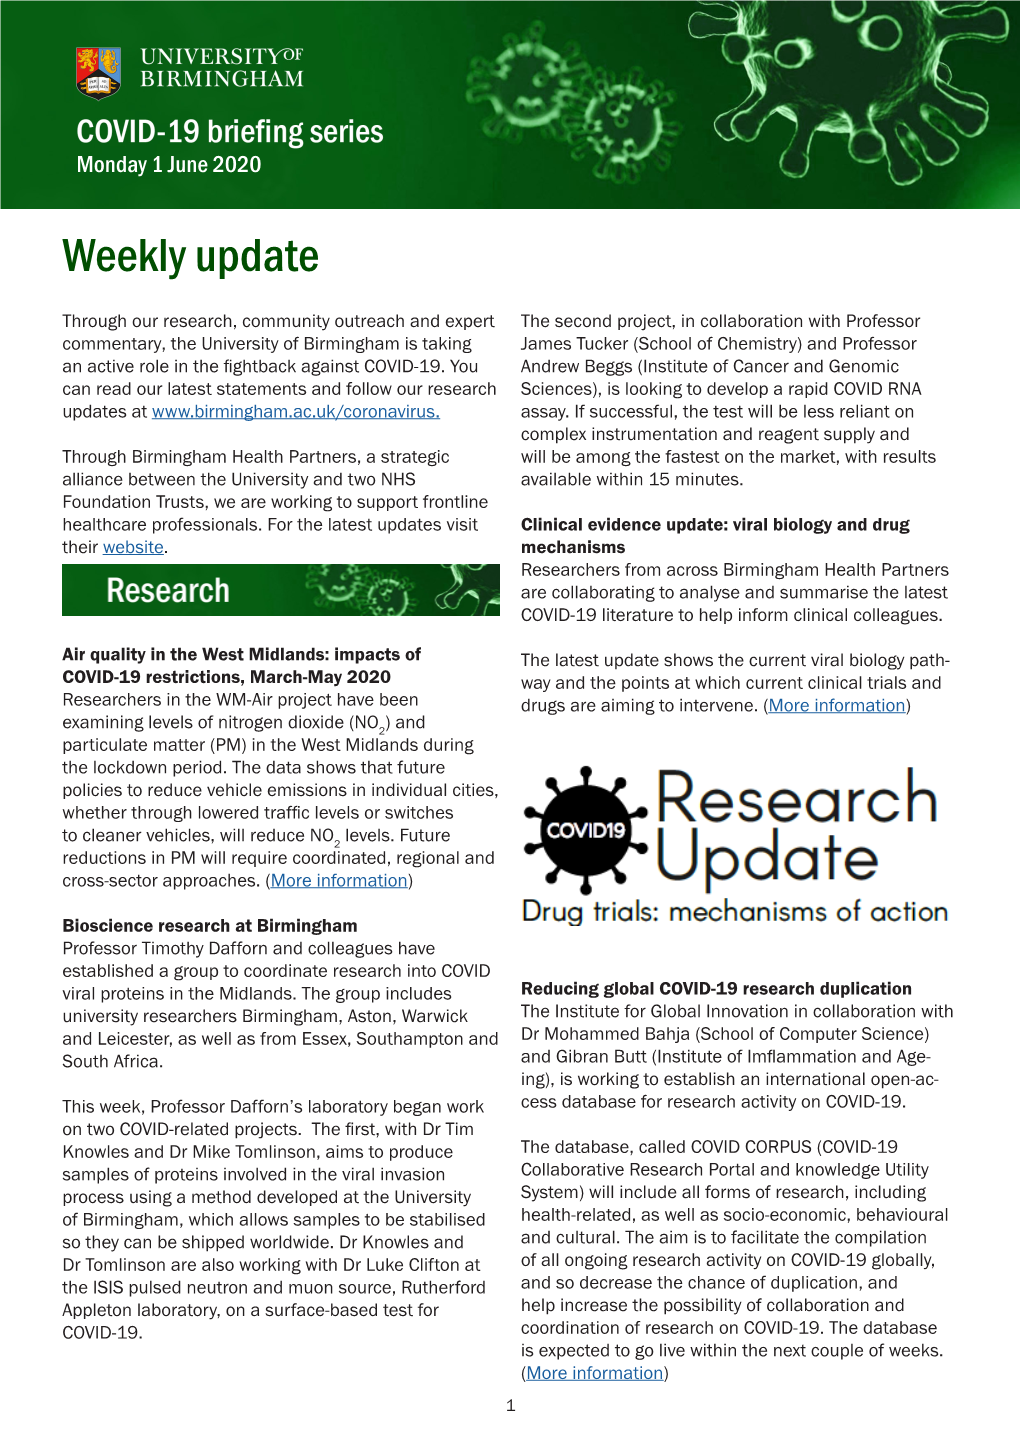 Weekly COVID-19 Briefing from the University of Birmingham